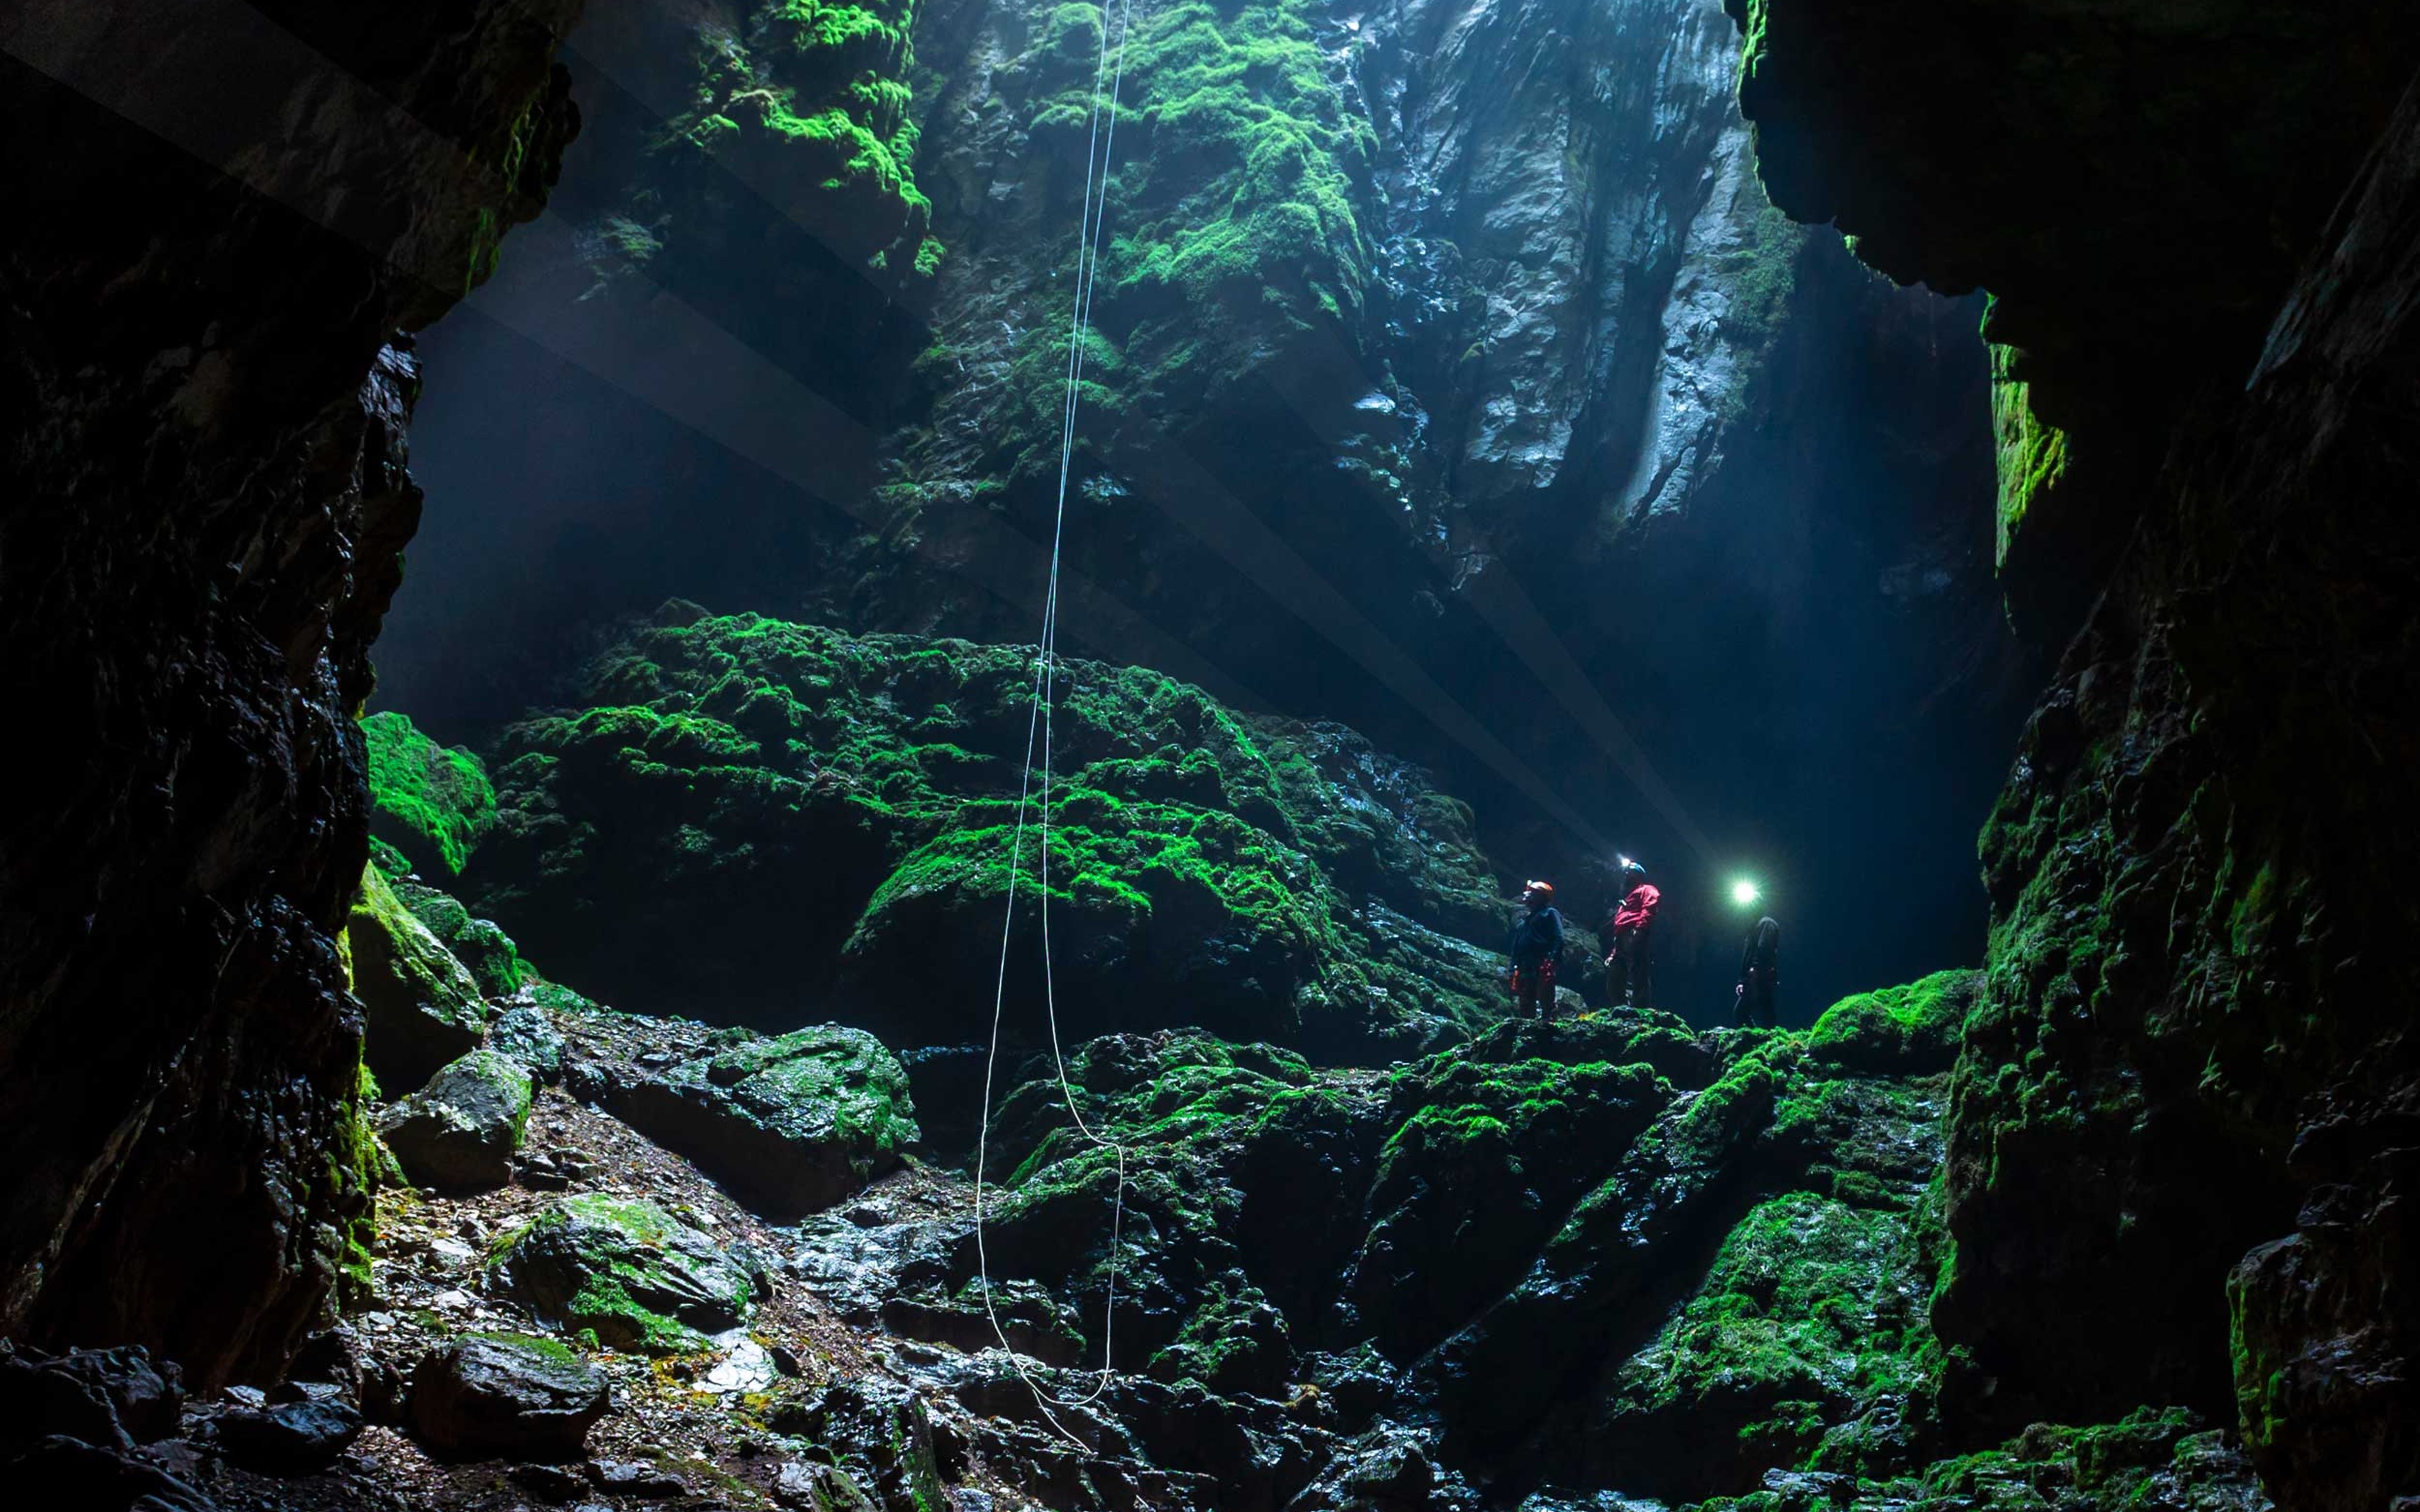 Caving team at the bottom of a deep cave wearing torches, with ropes hanging from the daylight above.